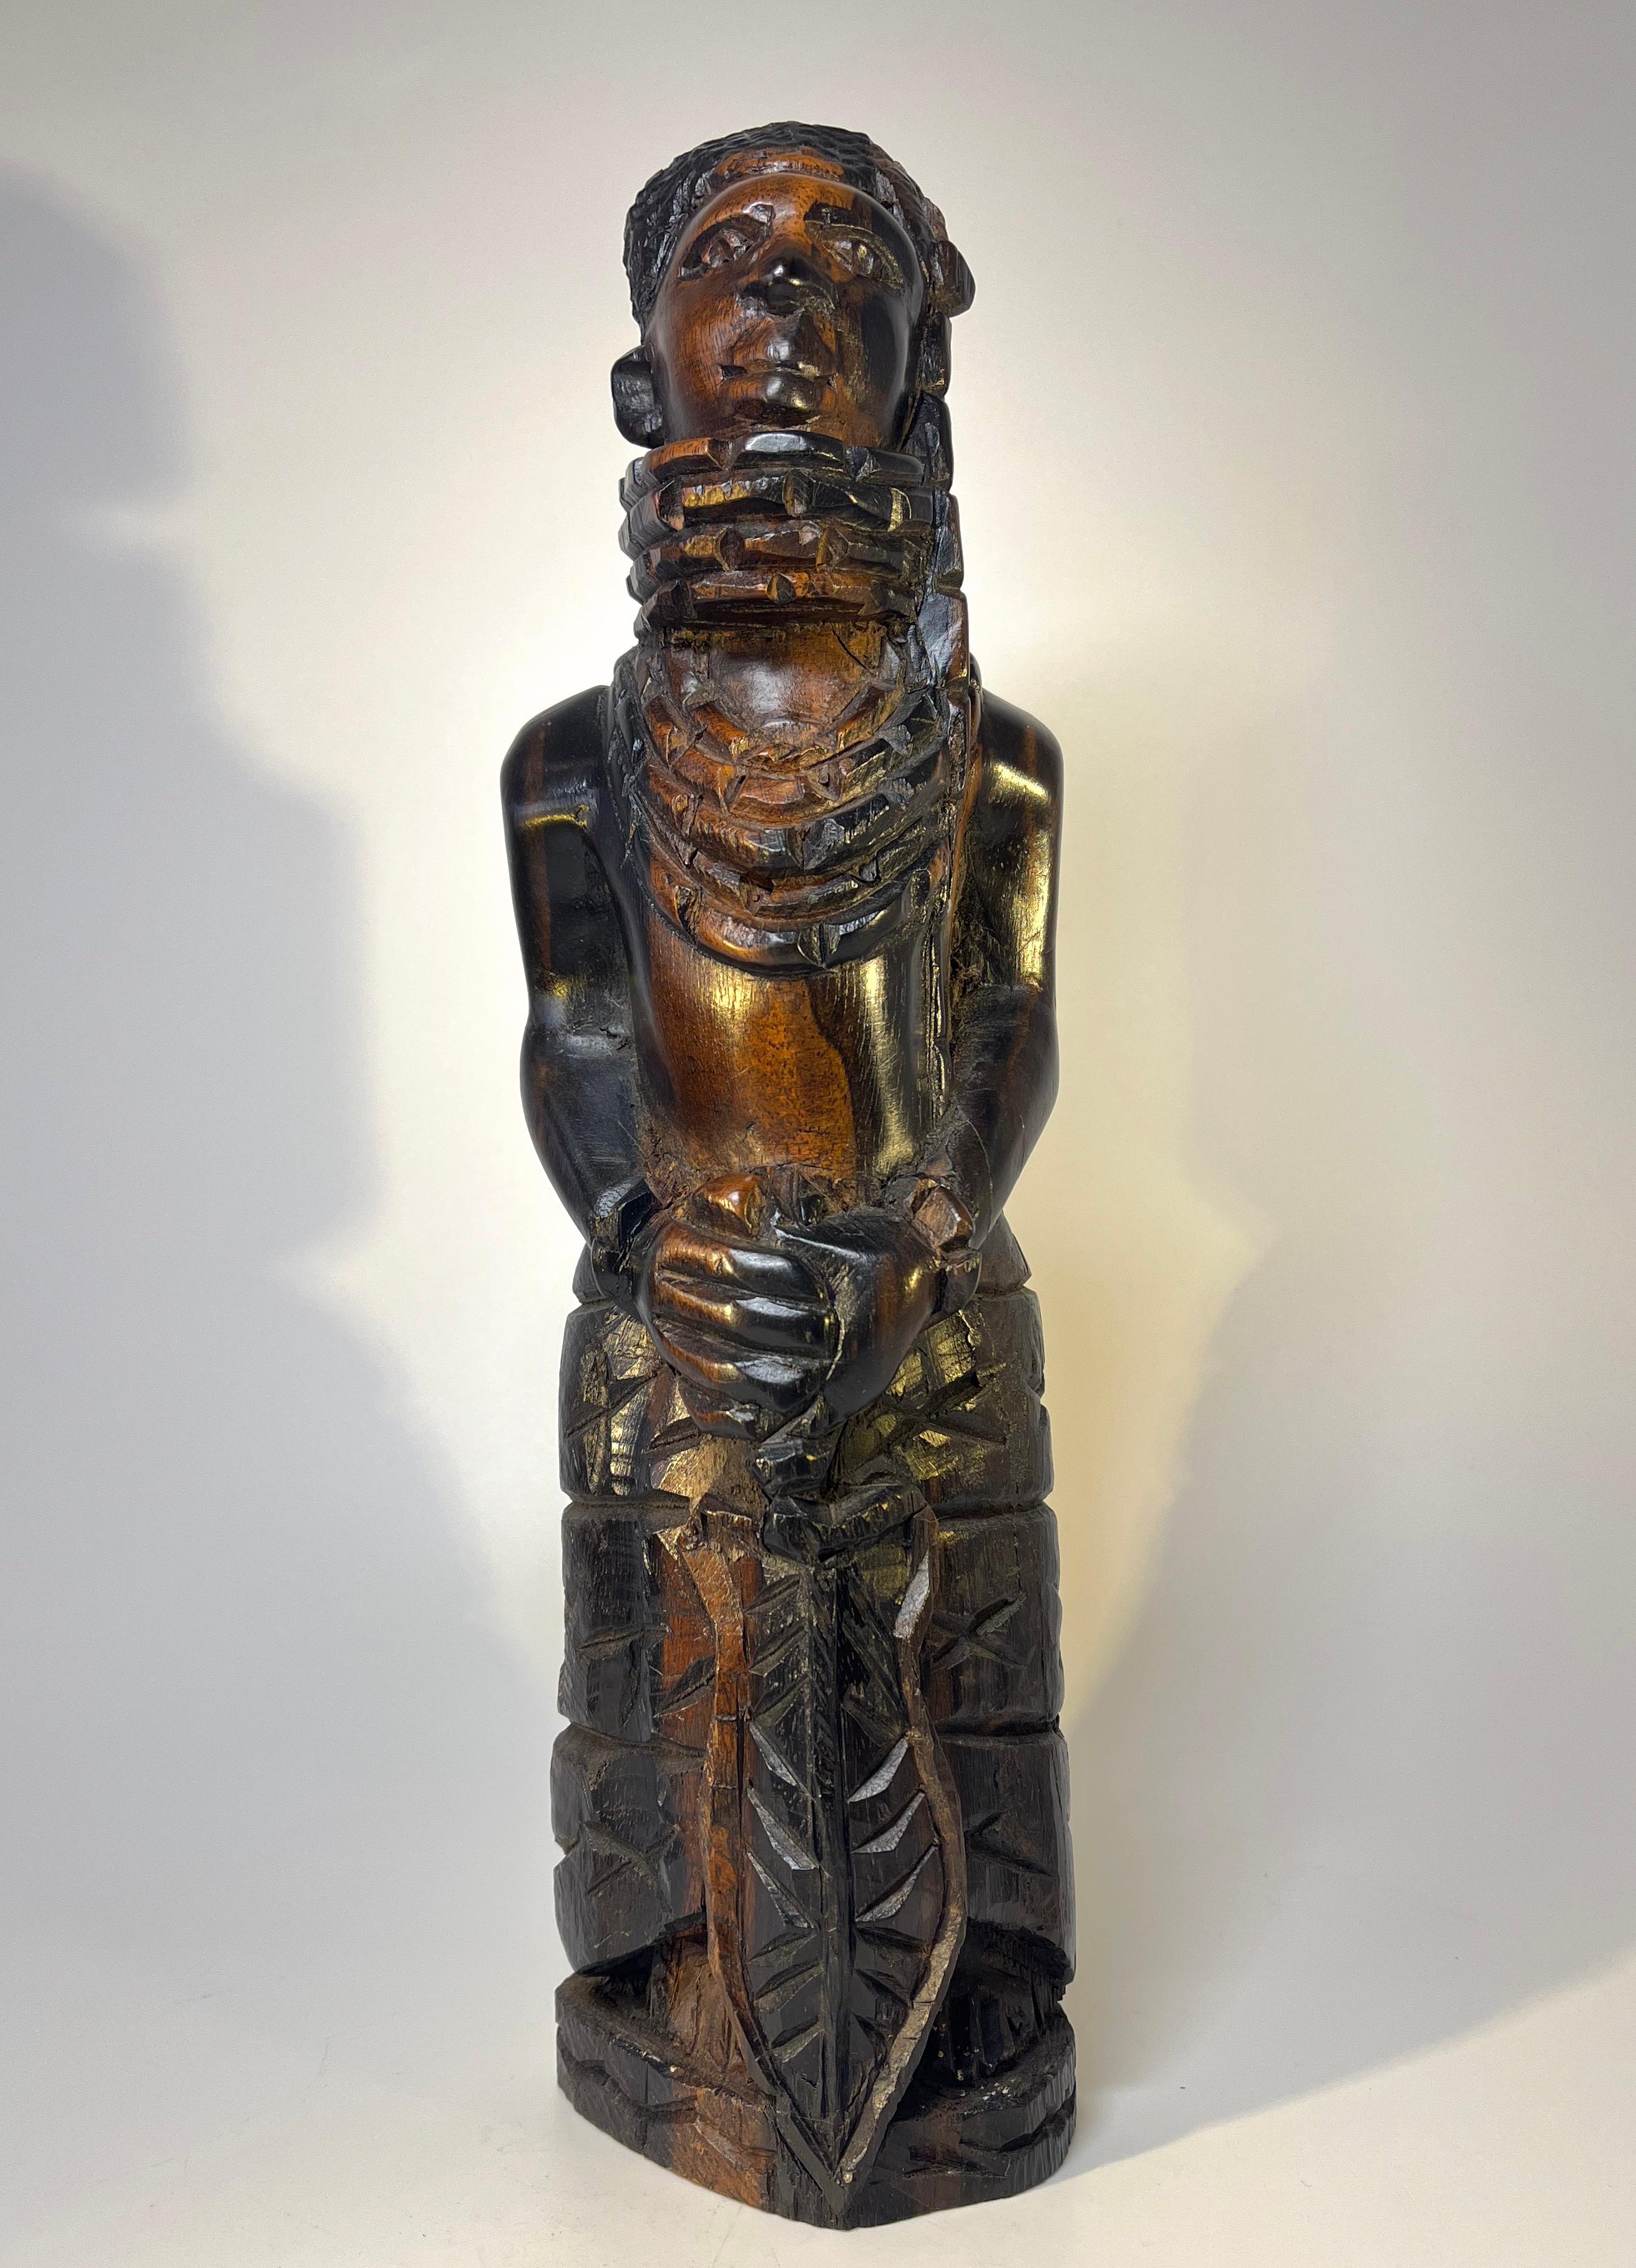 Benin Kingdom Ebony Carving of a Young King Oba, Nigerian For Sale 4